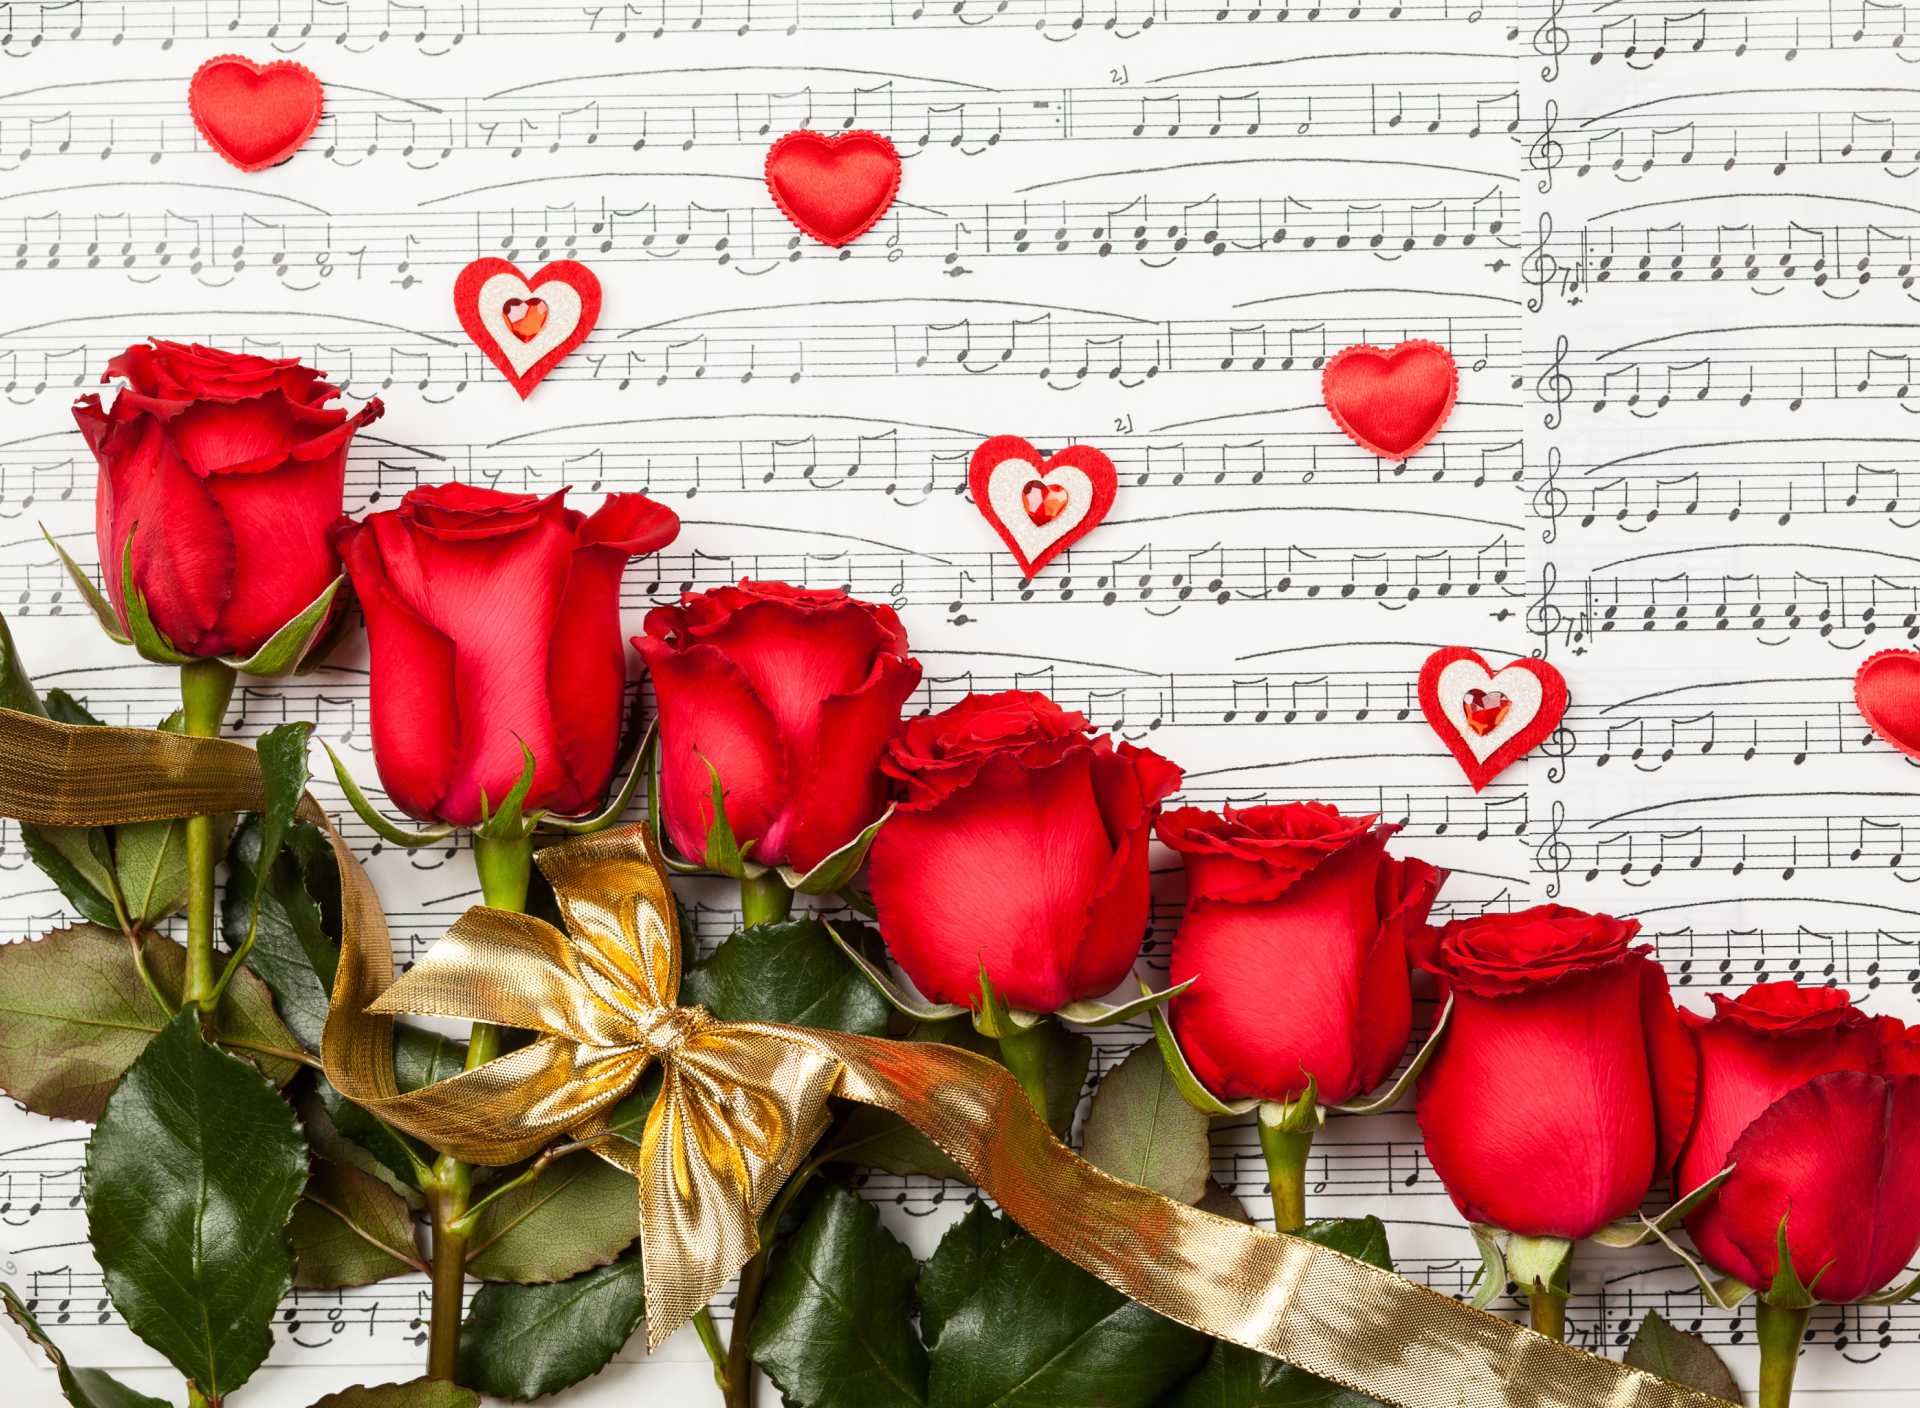 Das Roses, Love And Music Wallpaper 1920x1408